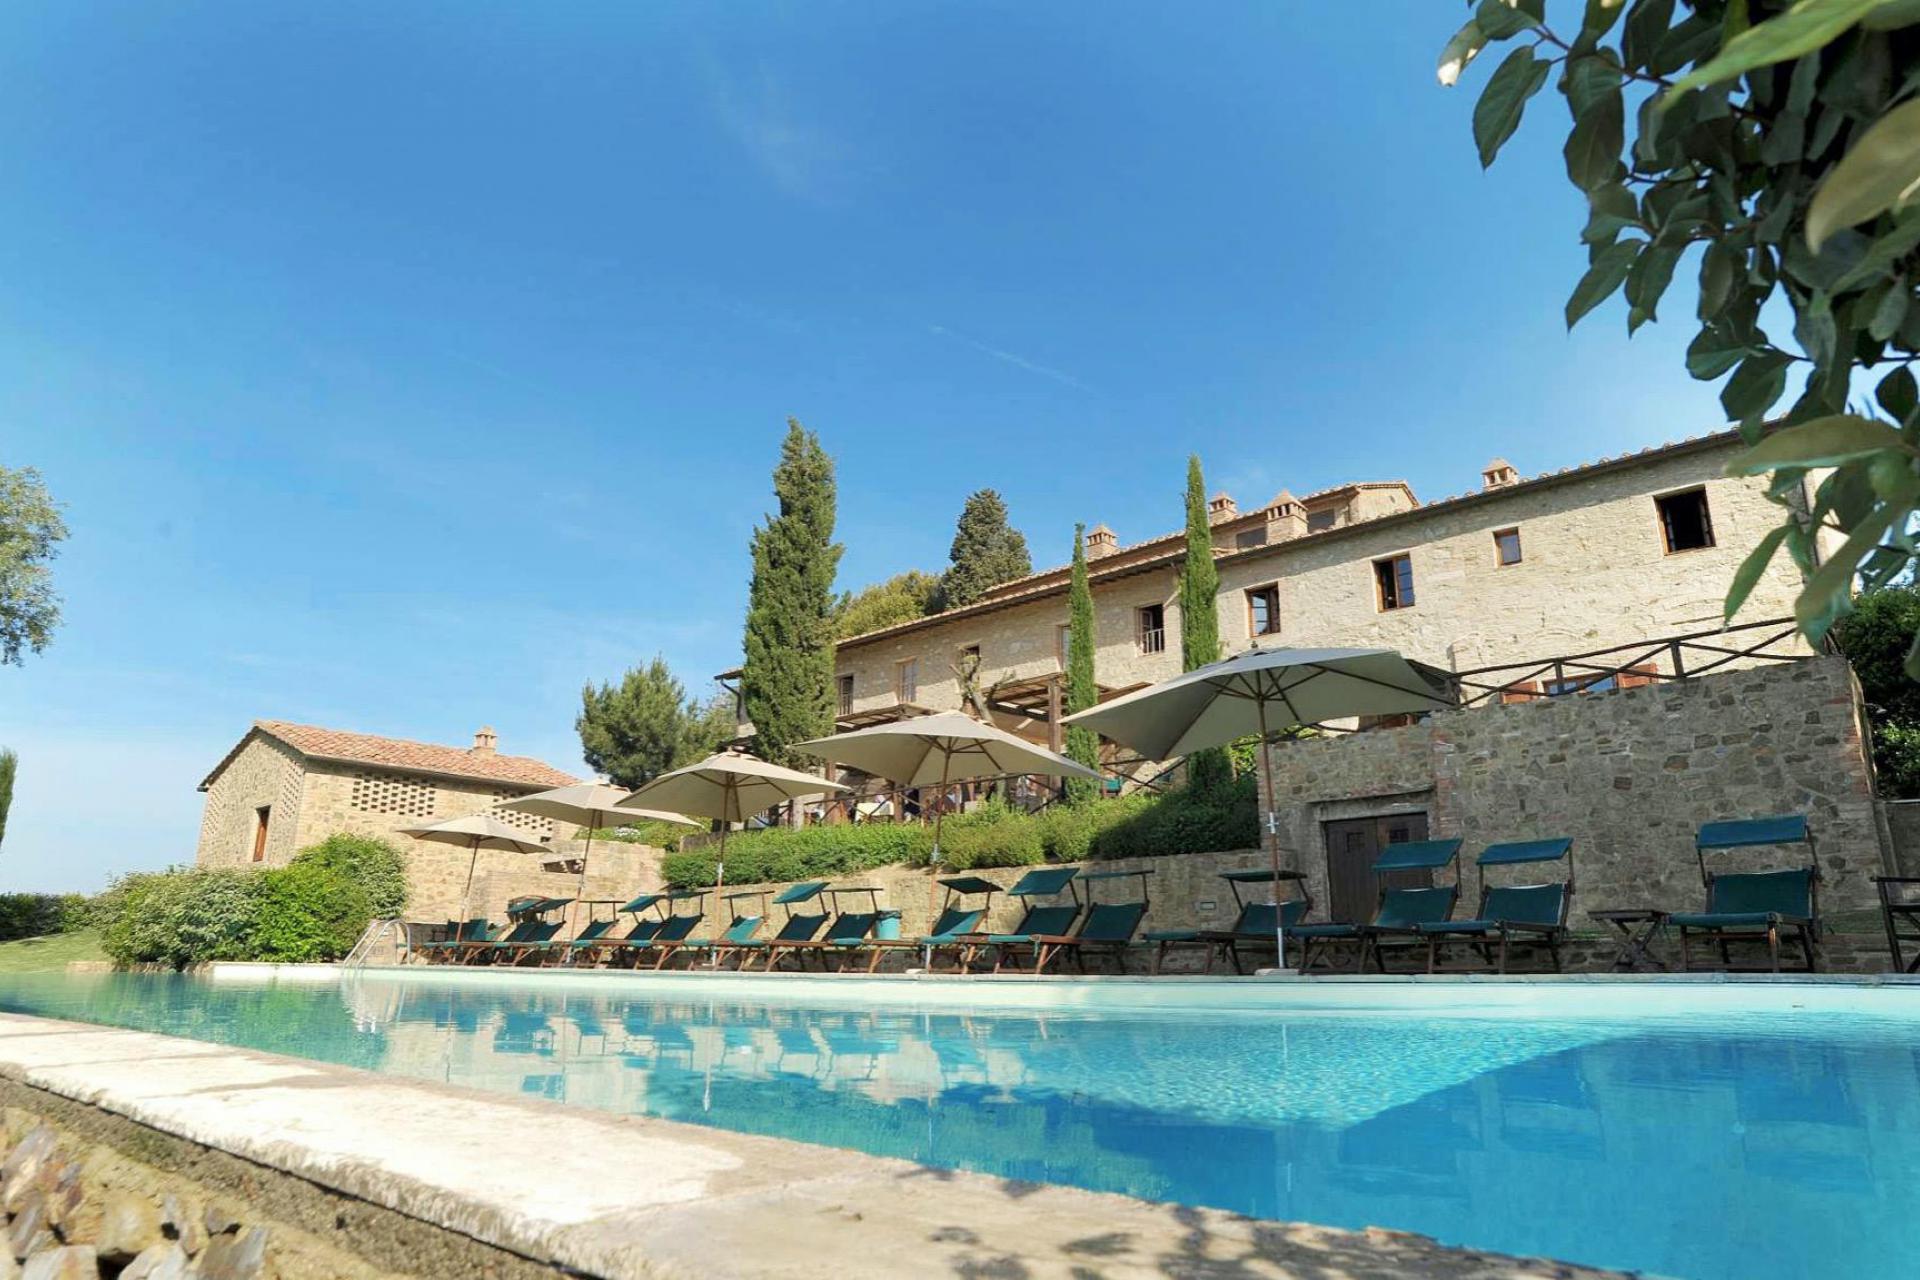 Agriturismo in Tuscany with true Italian hospitality